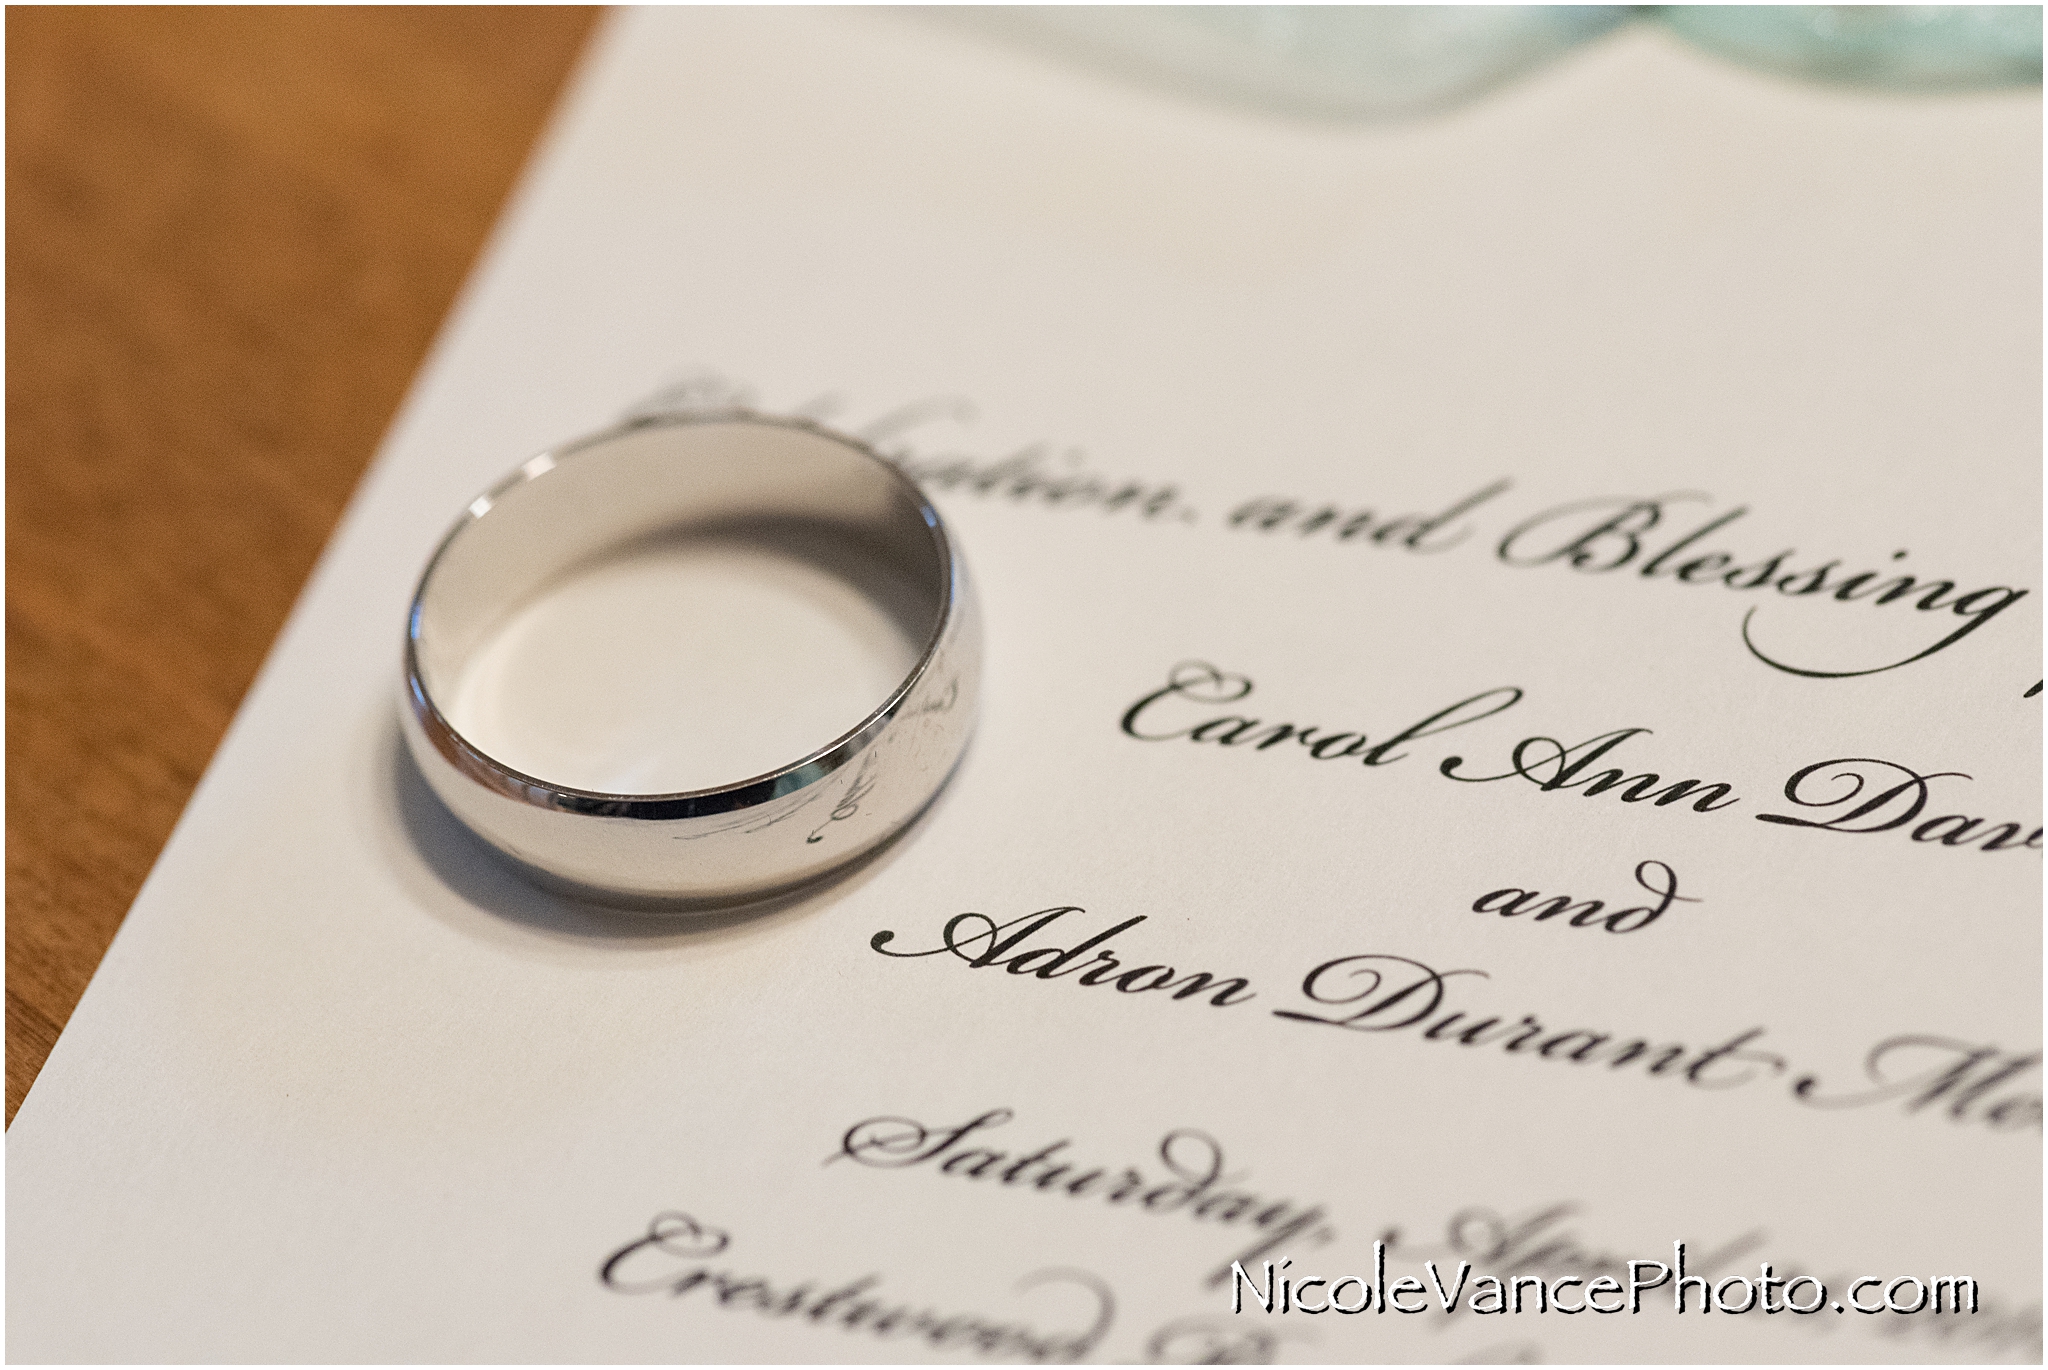 The groom's ring sits on the wedding invitation.